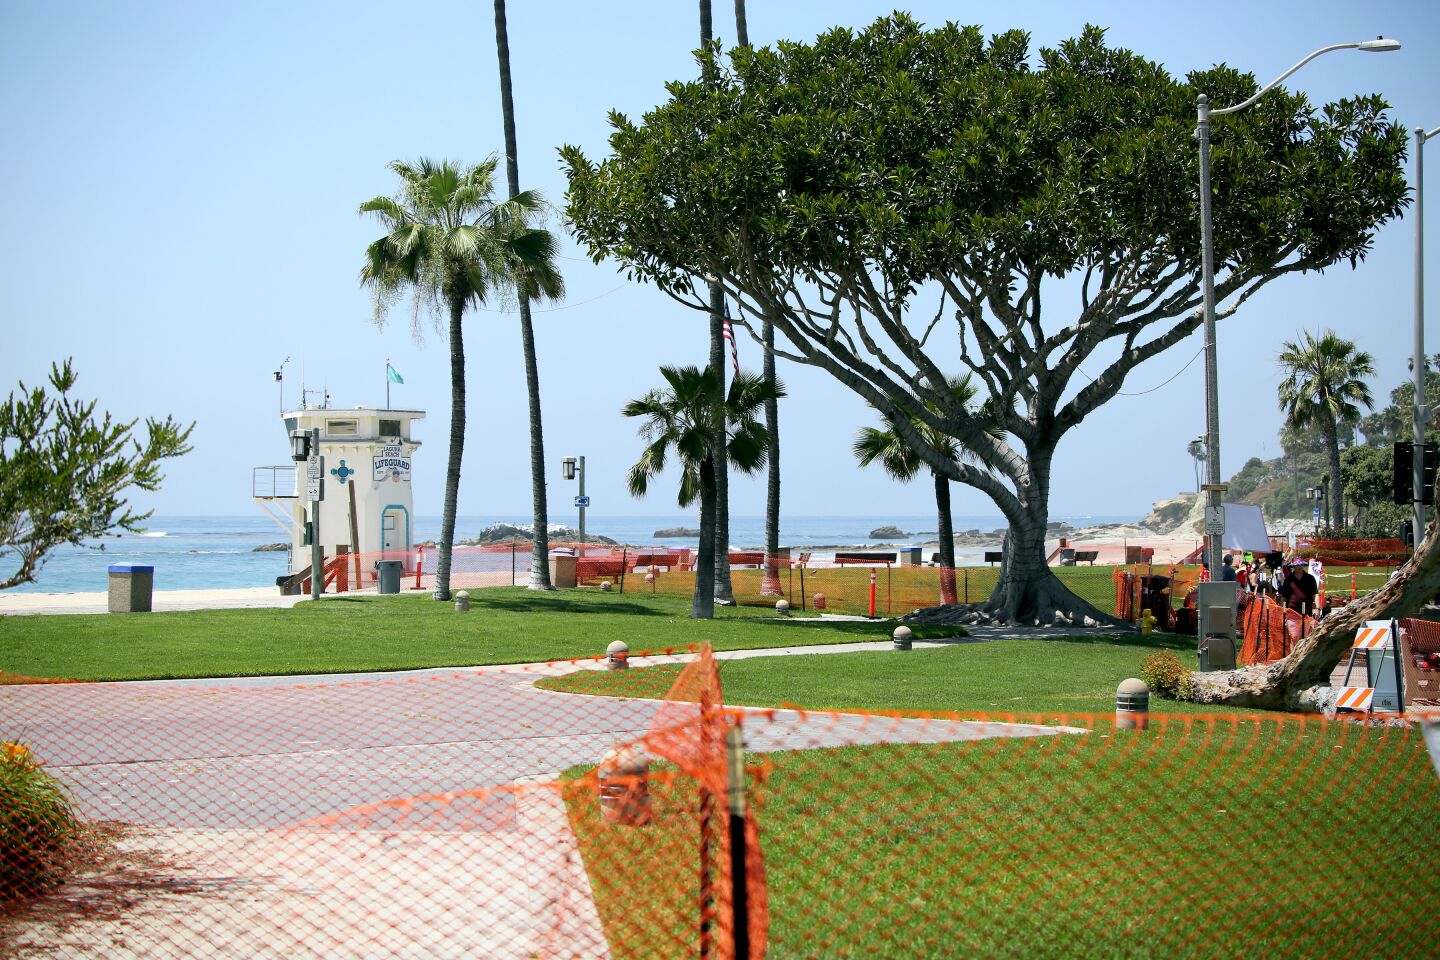 A view of the beach after the city fenced off Main Beach Park in Laguna Beach on Saturday.